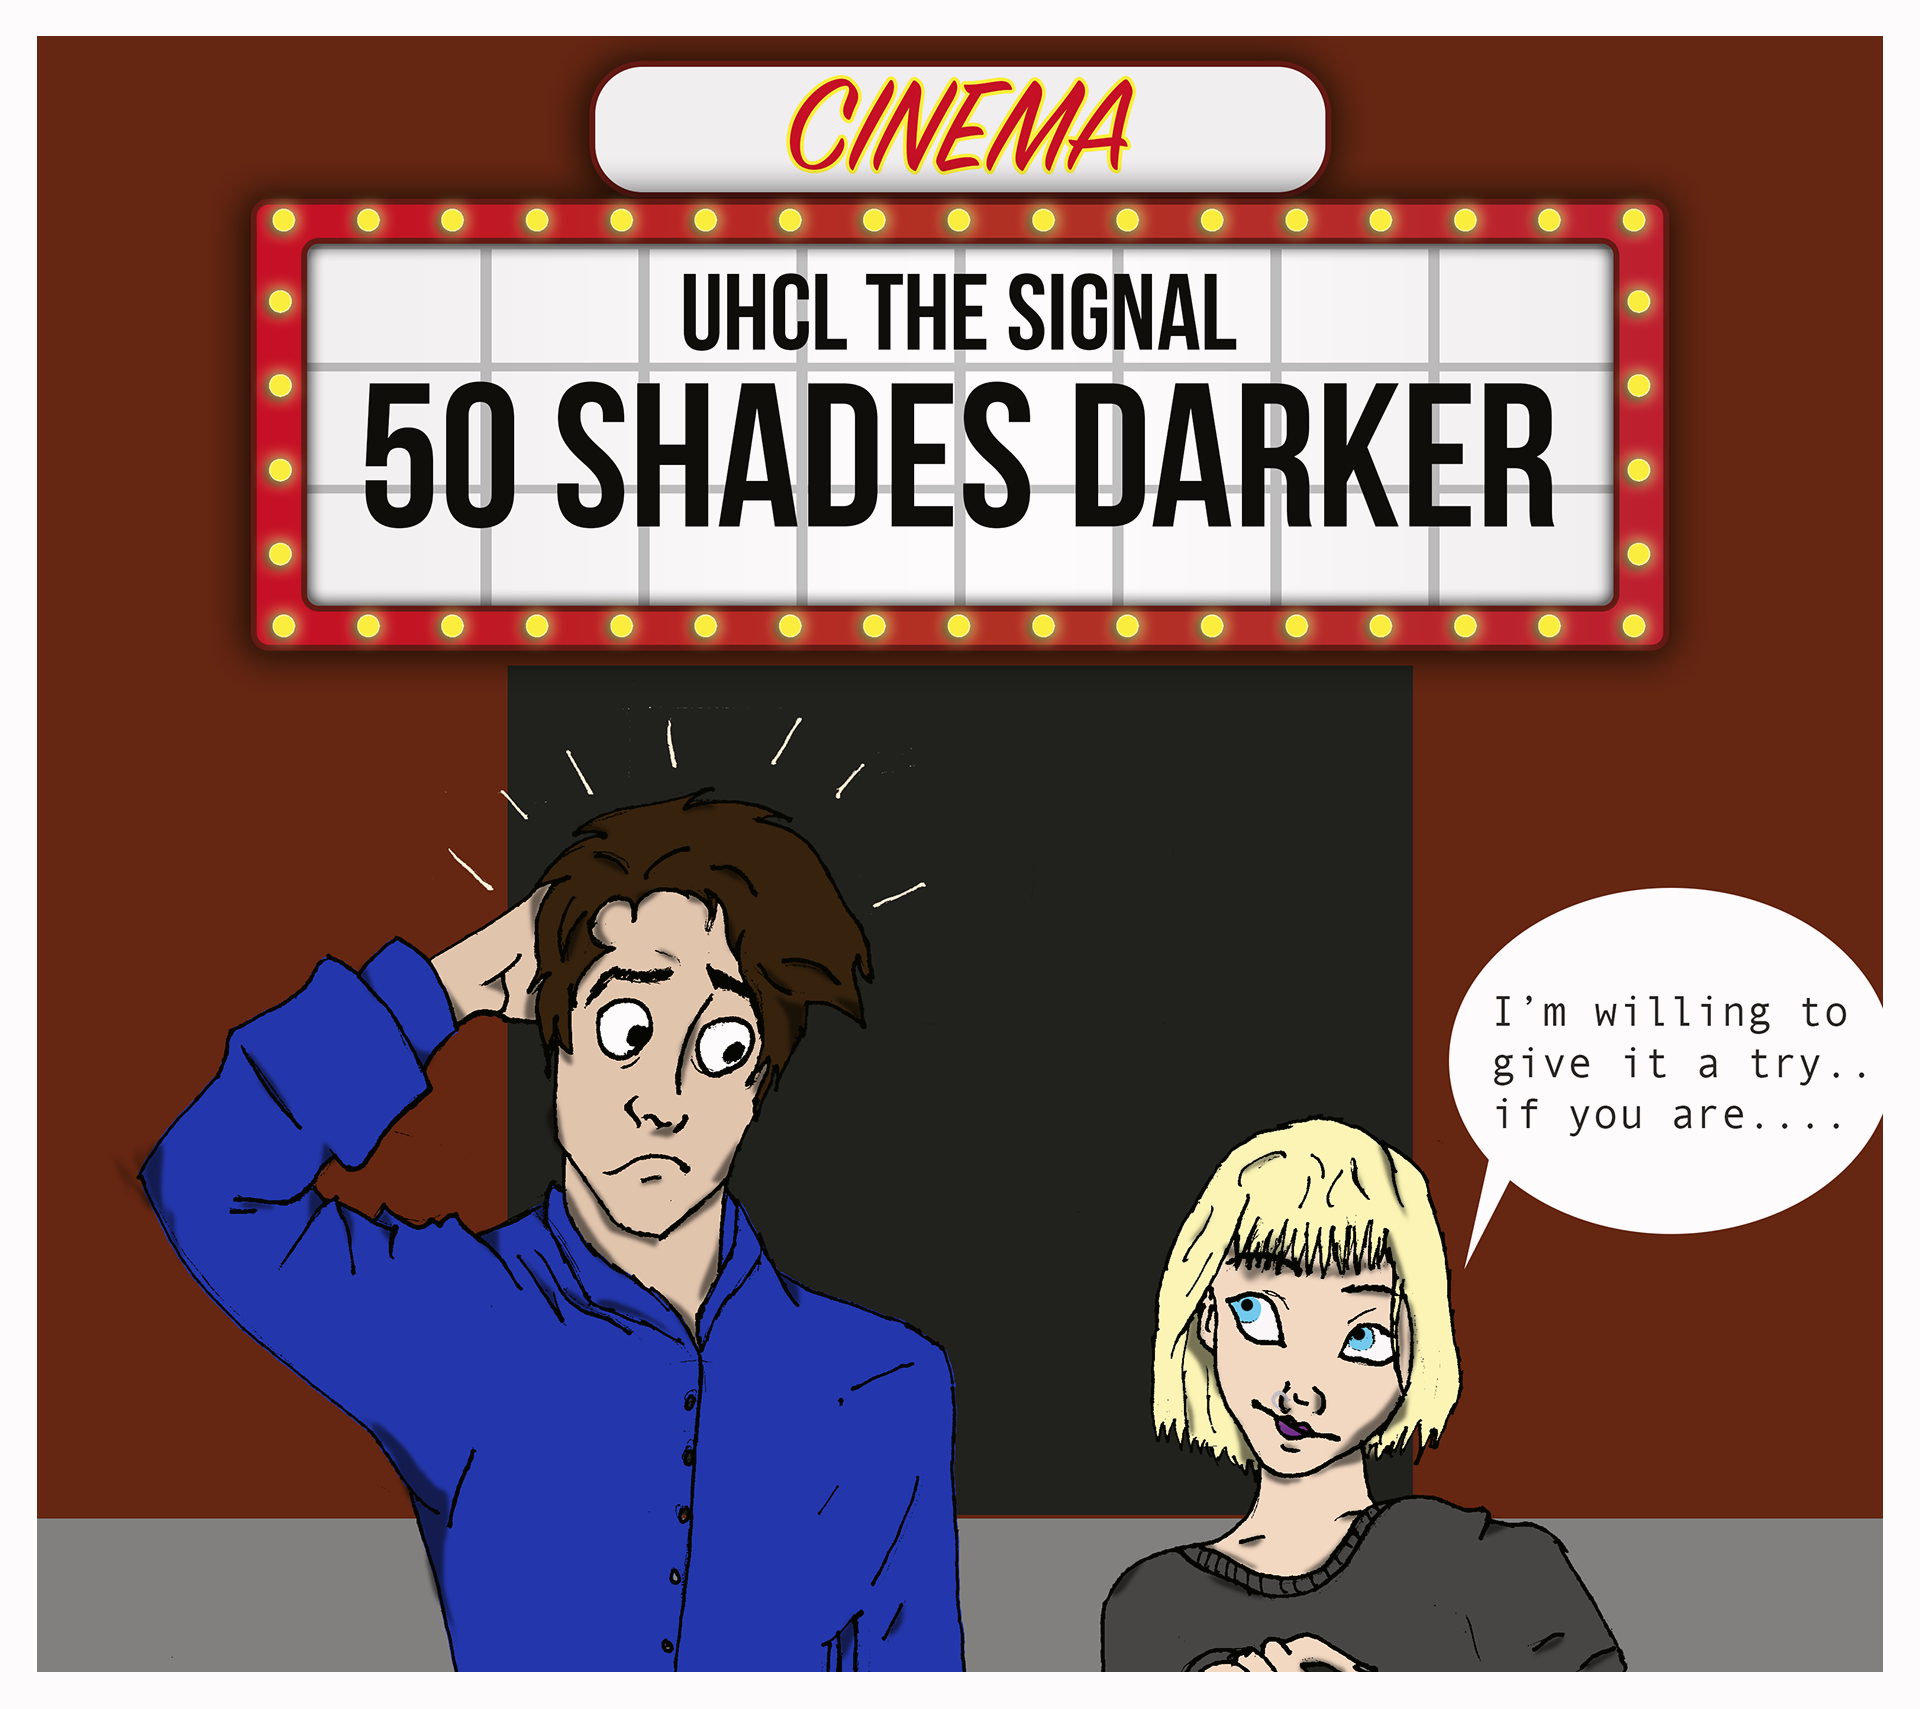 GRAPHIC: How many shades darker are you willing to go? Cartoon by The Signal Reporter Hunter Christian.